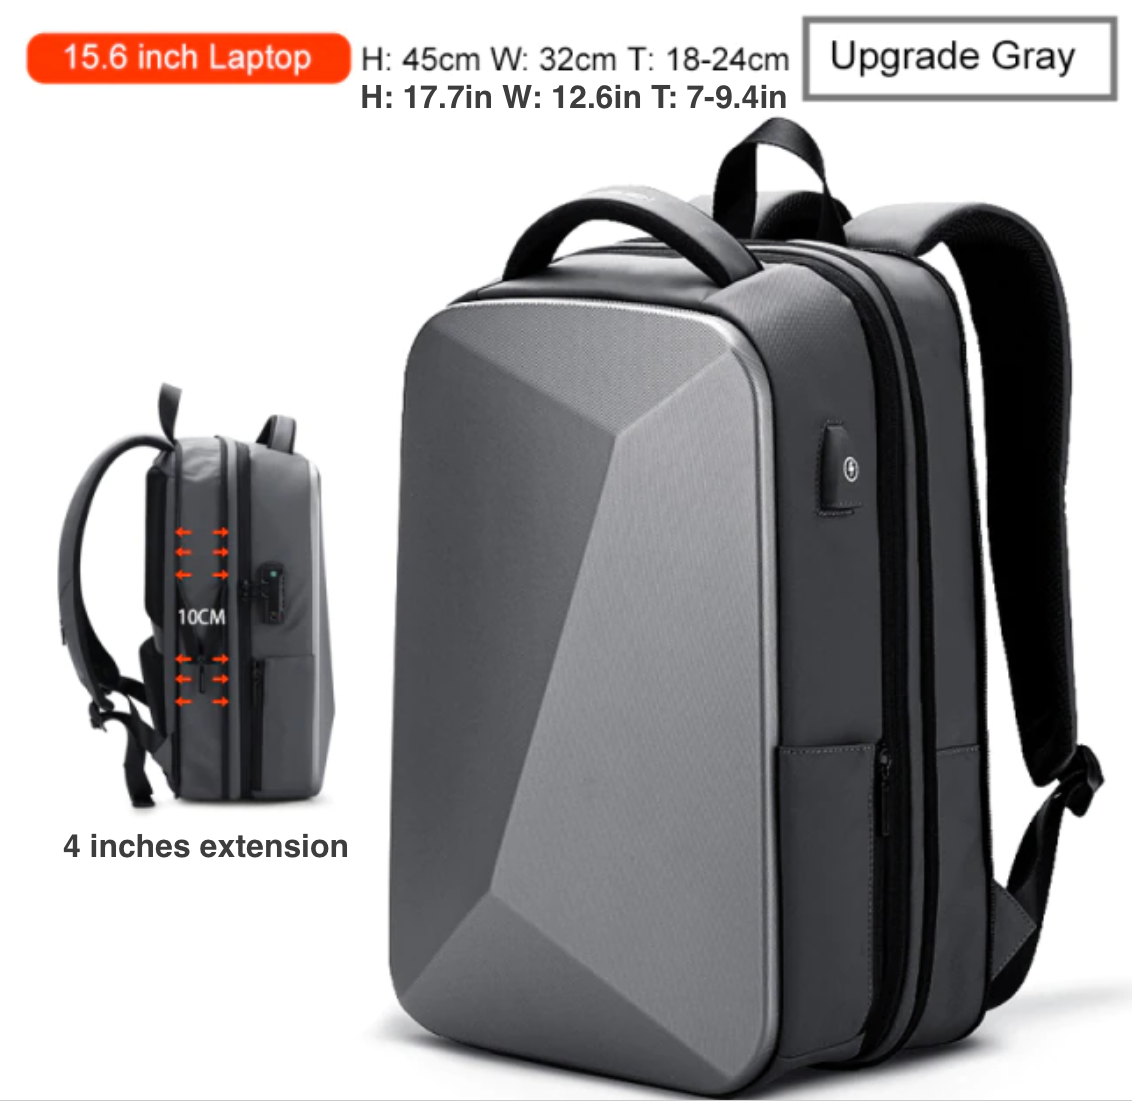 LaDolce Stylish Backpack™ Waterproof with USB charging port & anti-theft code lock system